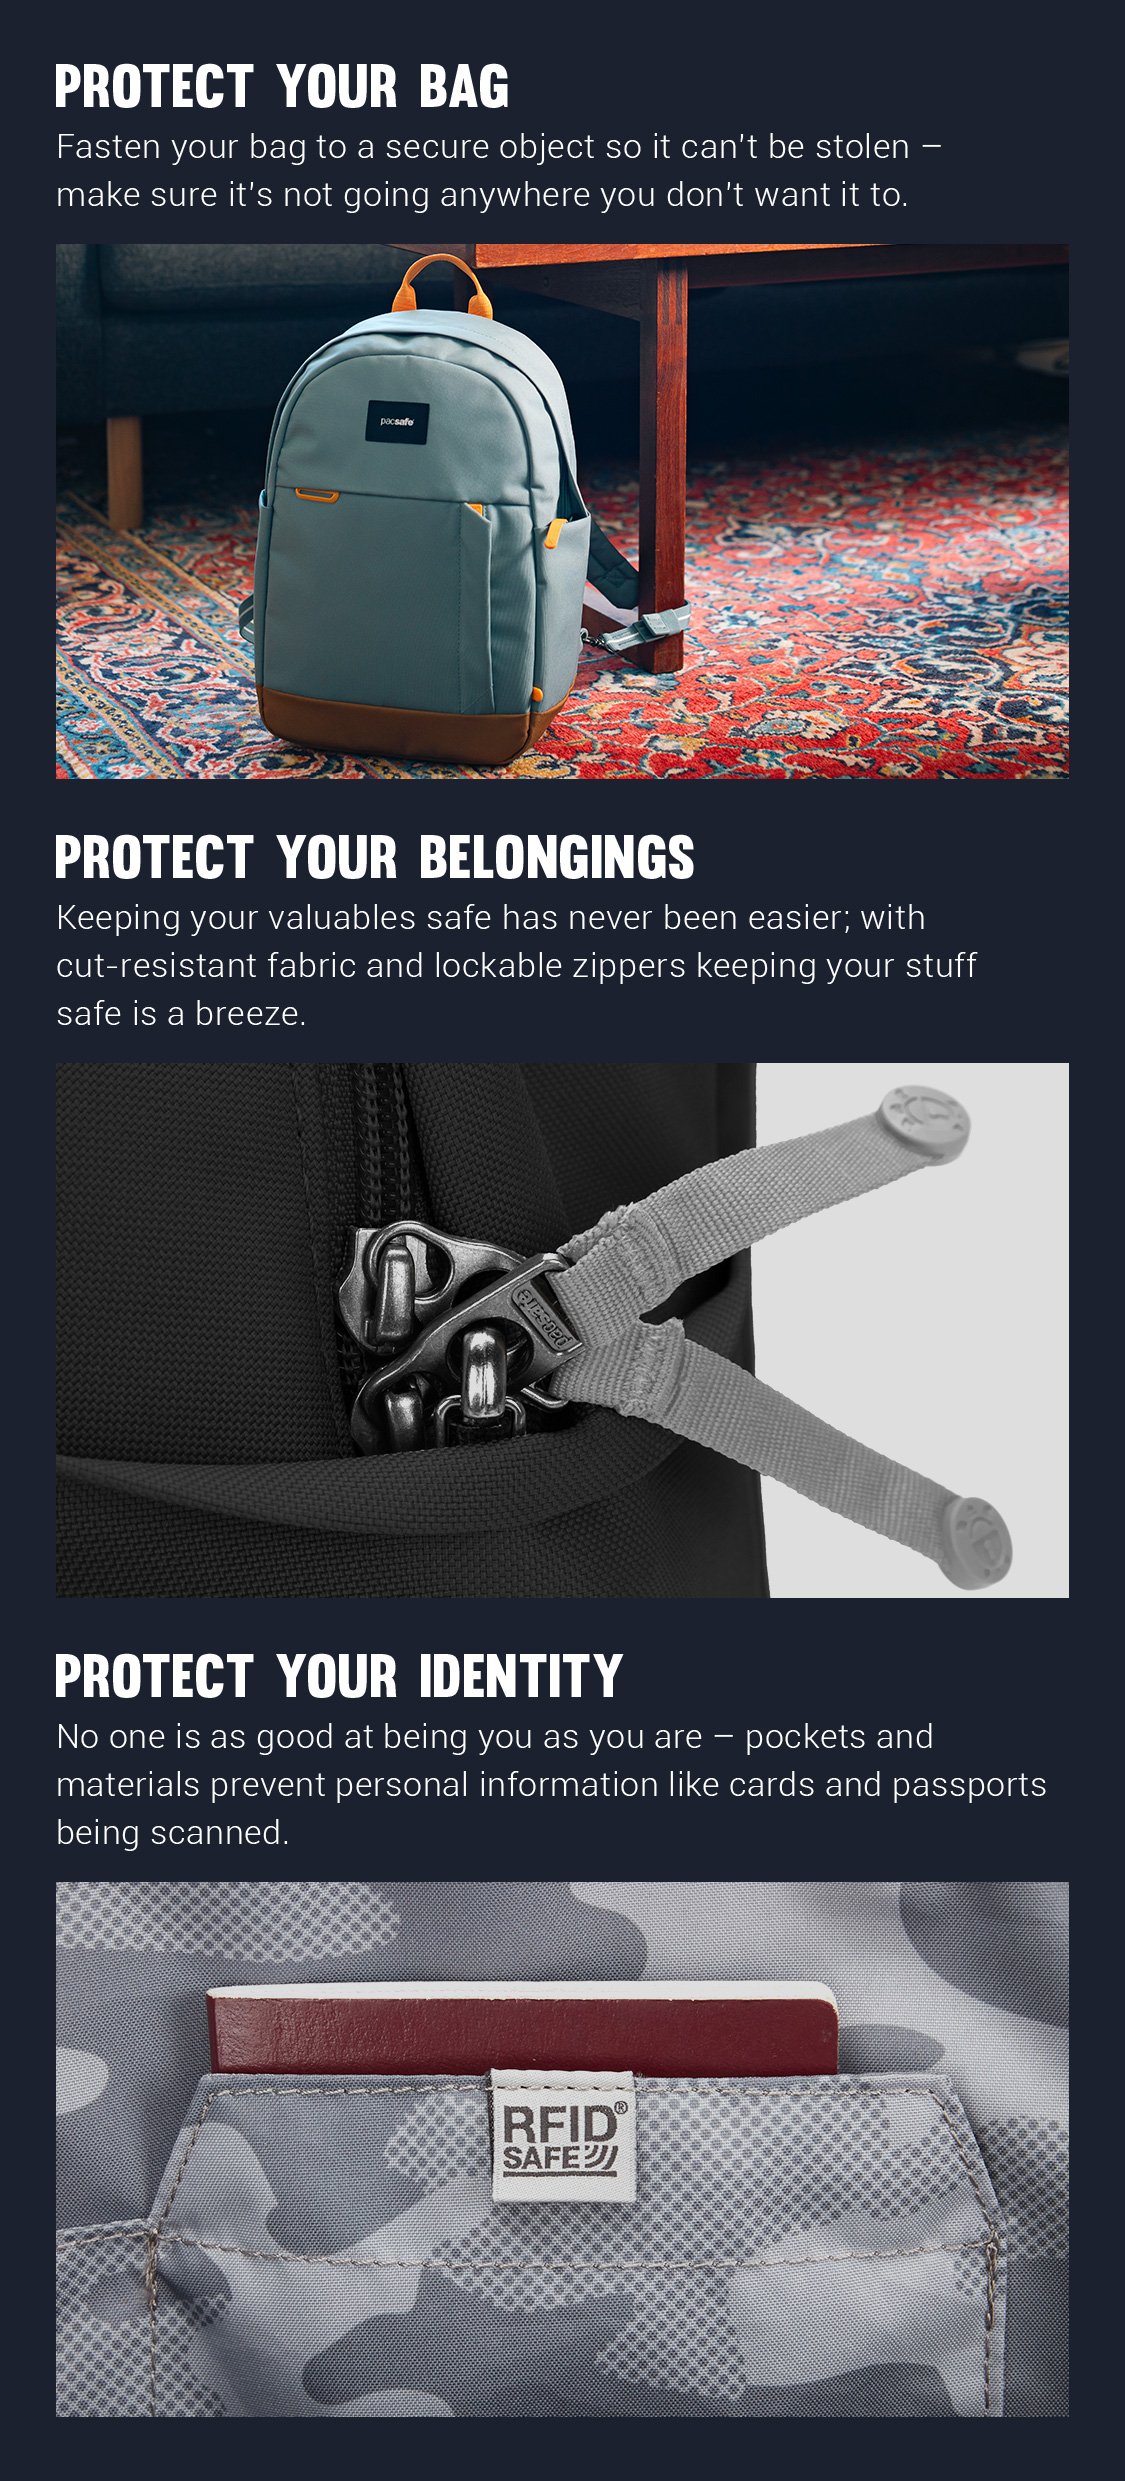 Protect Your Bag - Fastern your bag to a secure object so it can't be stolen - make sure it's not going anywhere you don't want it to. 
Protect Your Belongings - Keeping your valuable safe has never been easier; with cut-resistant fabric and lockable zippers keeping your stuff safe is a breeze.
Protect Your Identity - No one is as good at being you as you are - pockets and materials prevent personal information like cards and passports being scanned.